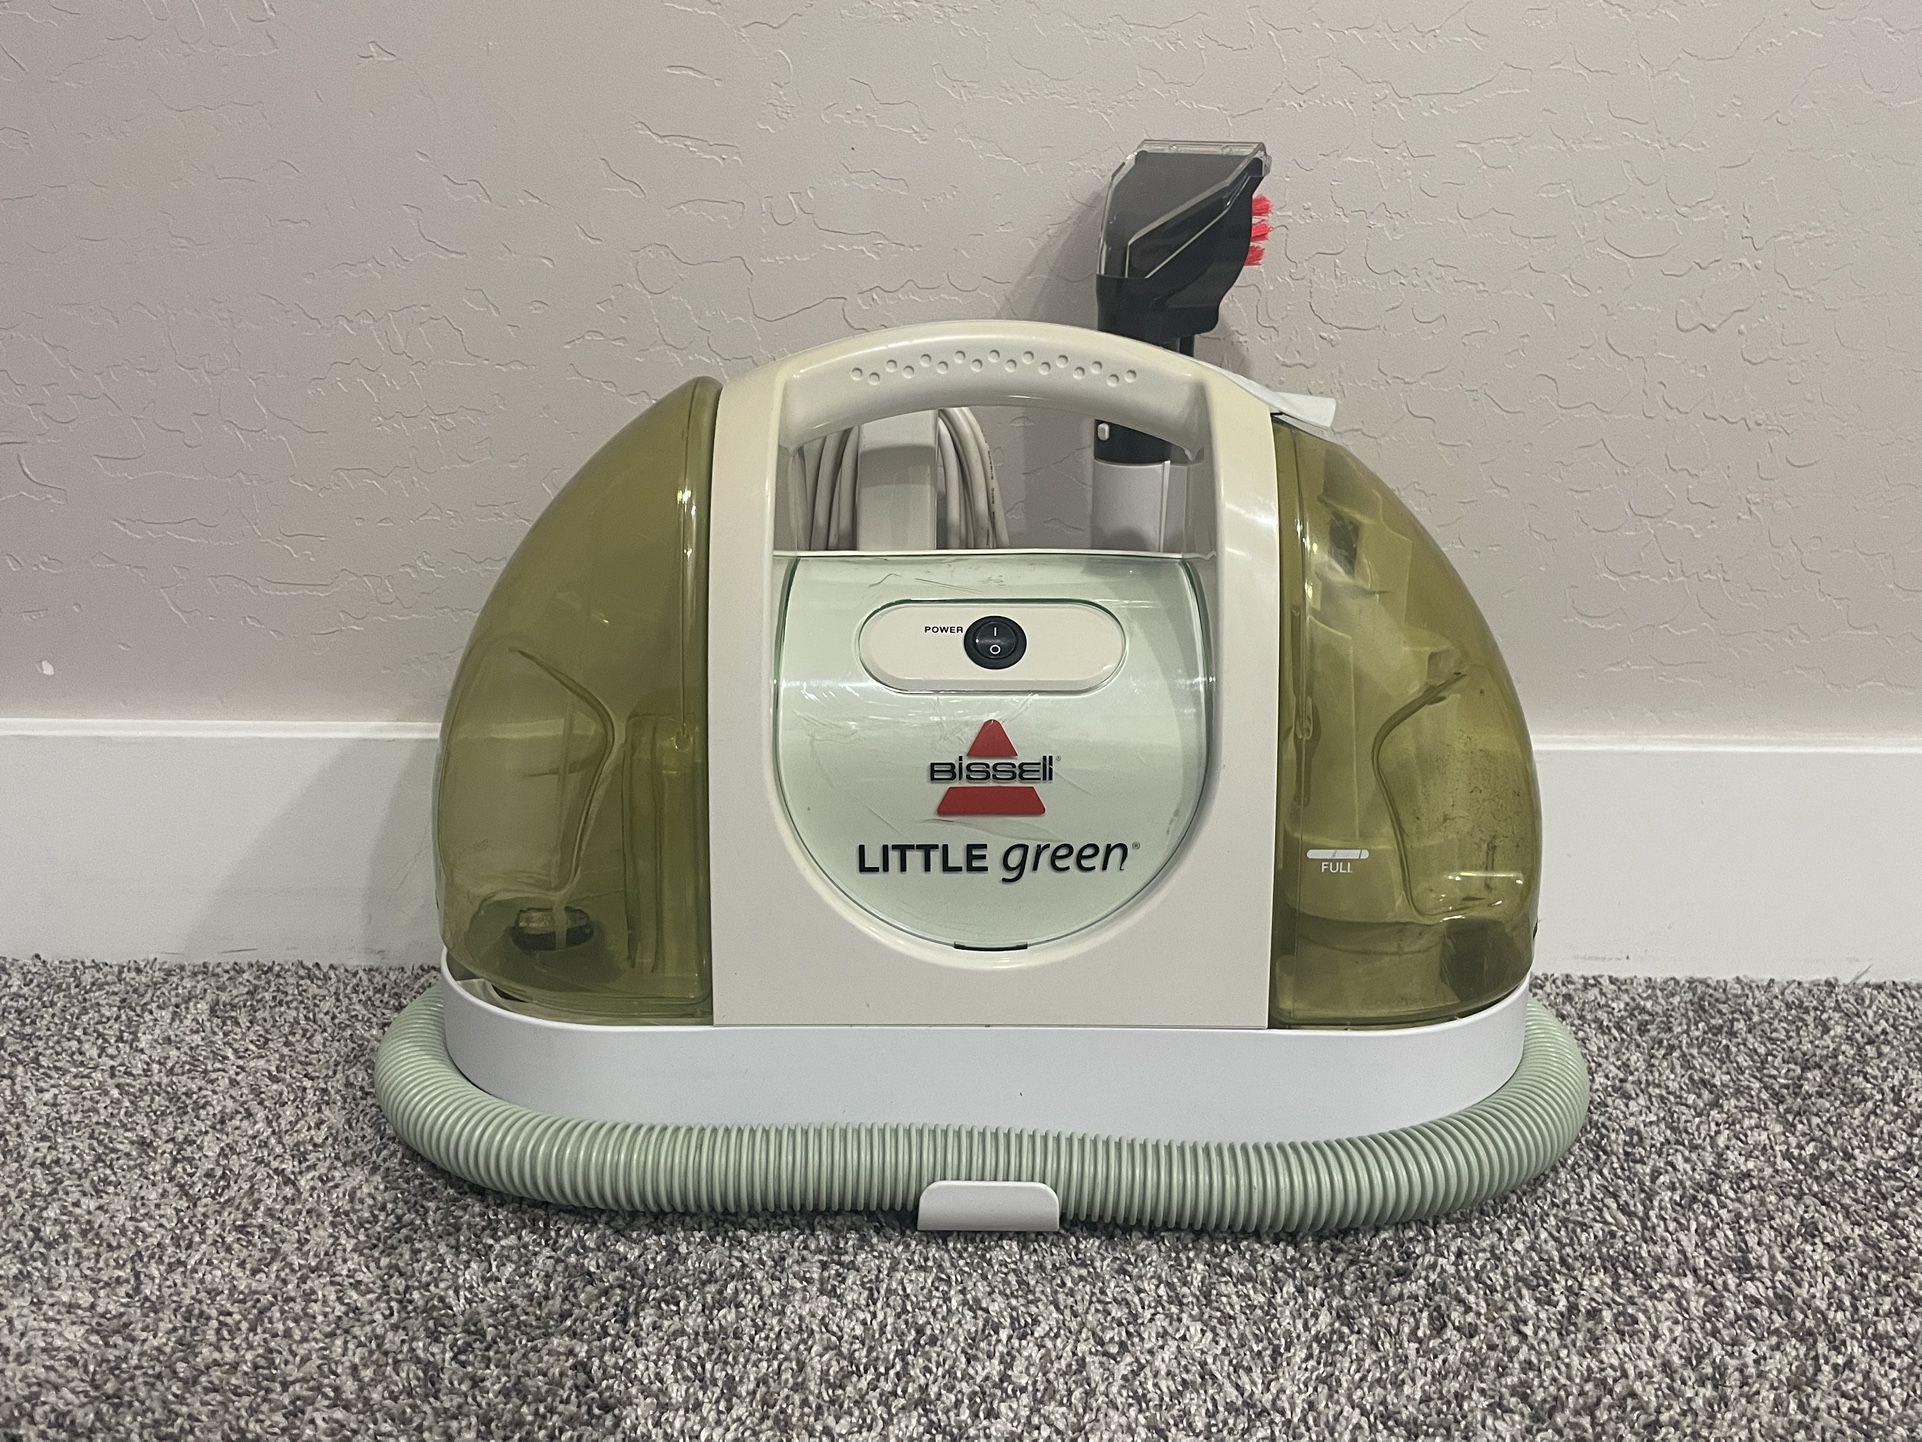 BISSELL ‘Little Green - 1400’ Portable Spot Cleaner